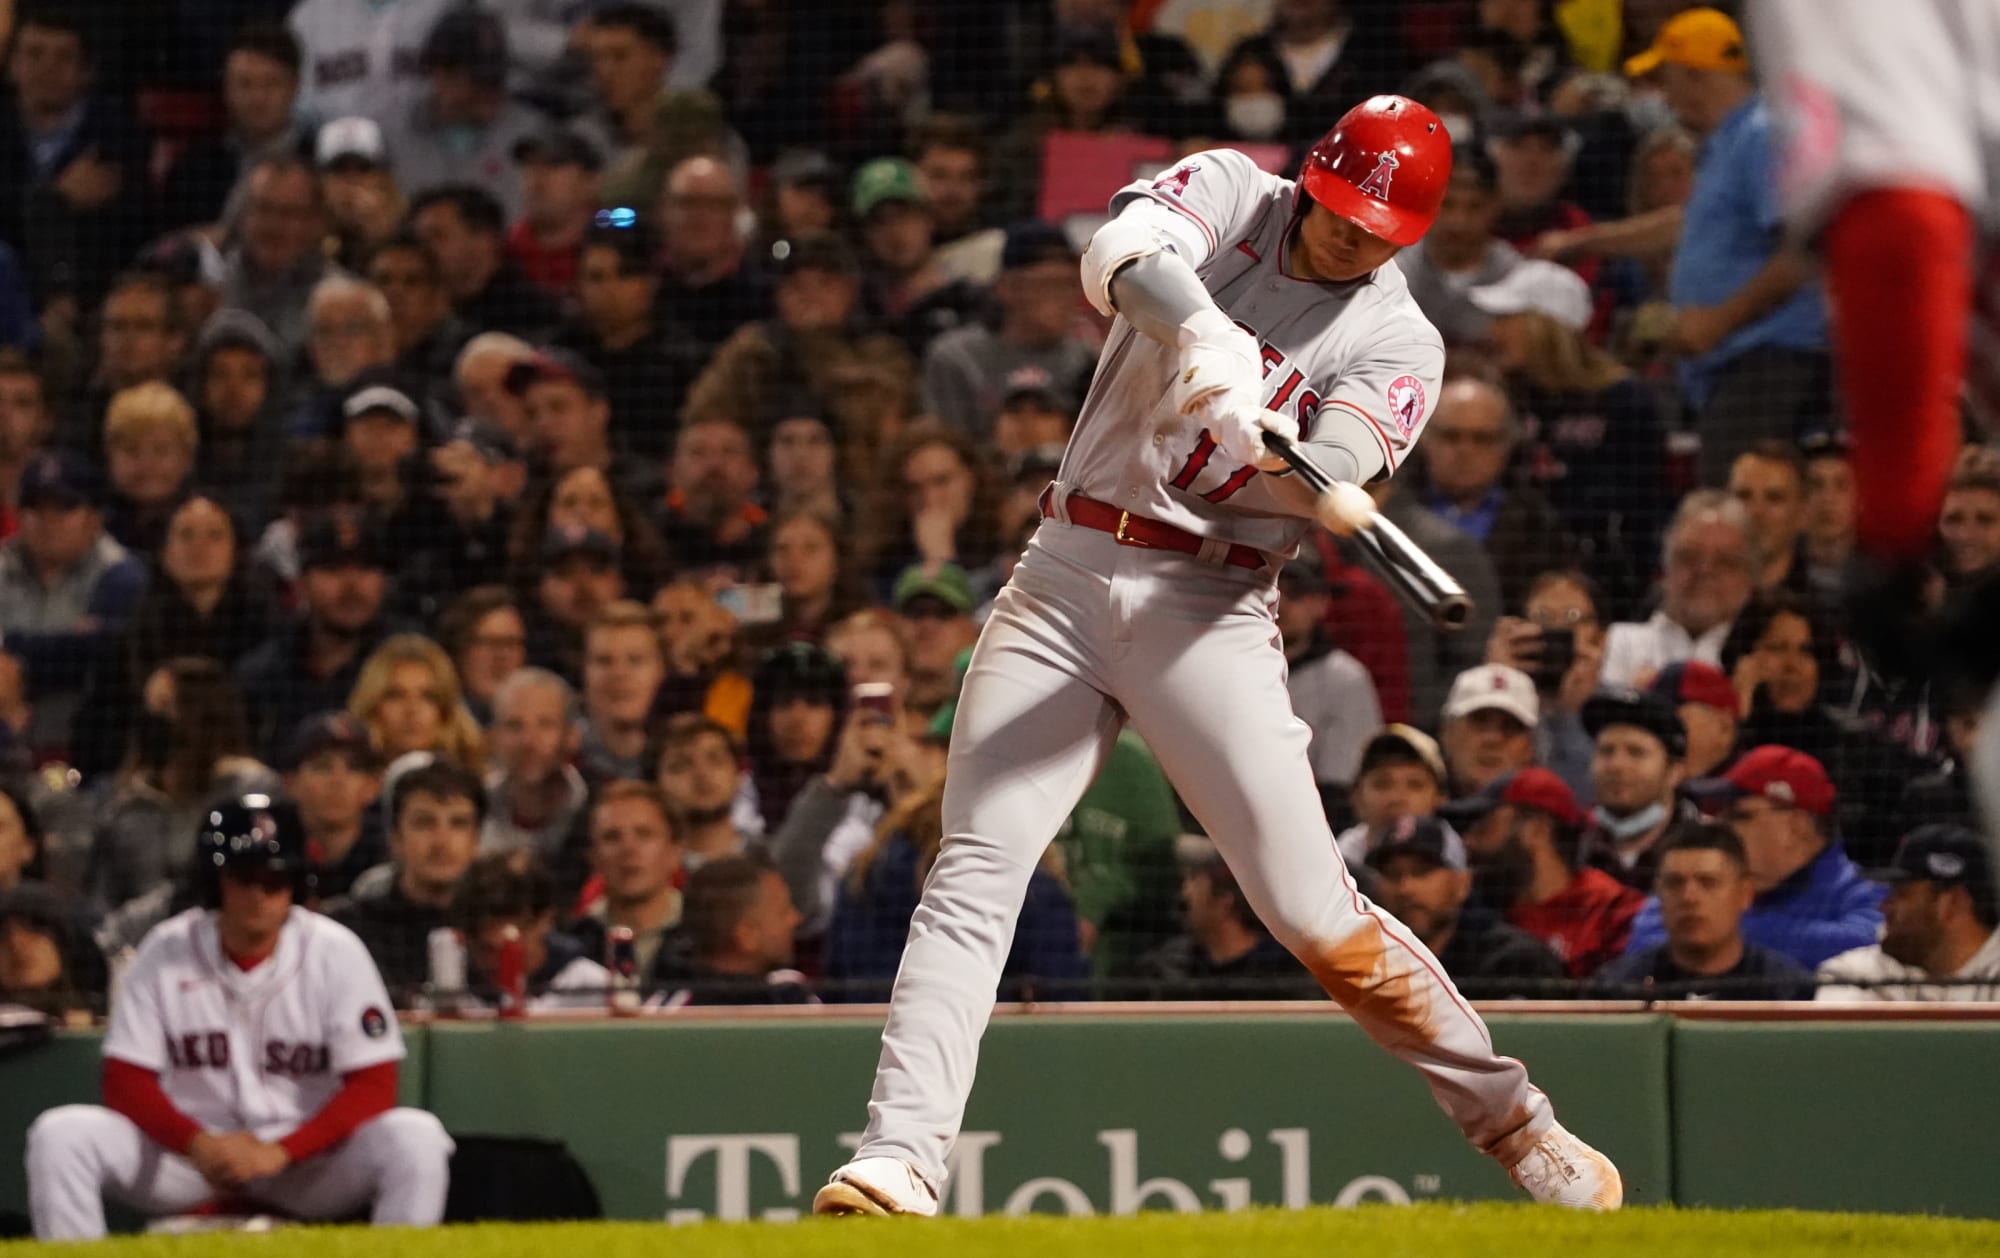 Photo of Shohei Ohtani hits a ball so hard it knocks his own number off the iconic Green Monster